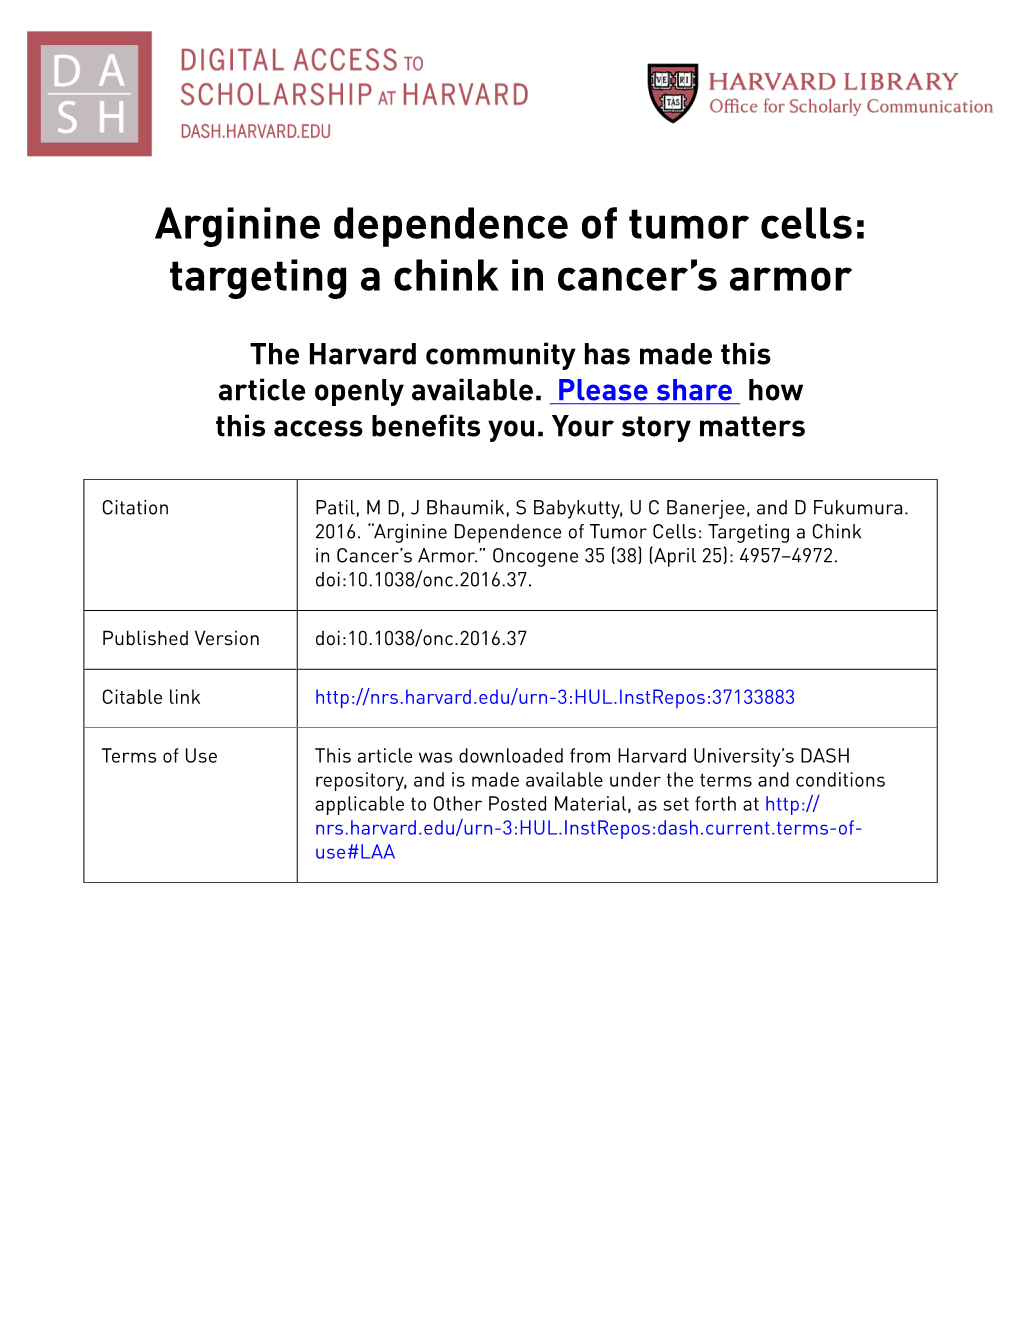 Arginine Dependence of Tumor Cells: Targeting a Chink in Cancer's Armor